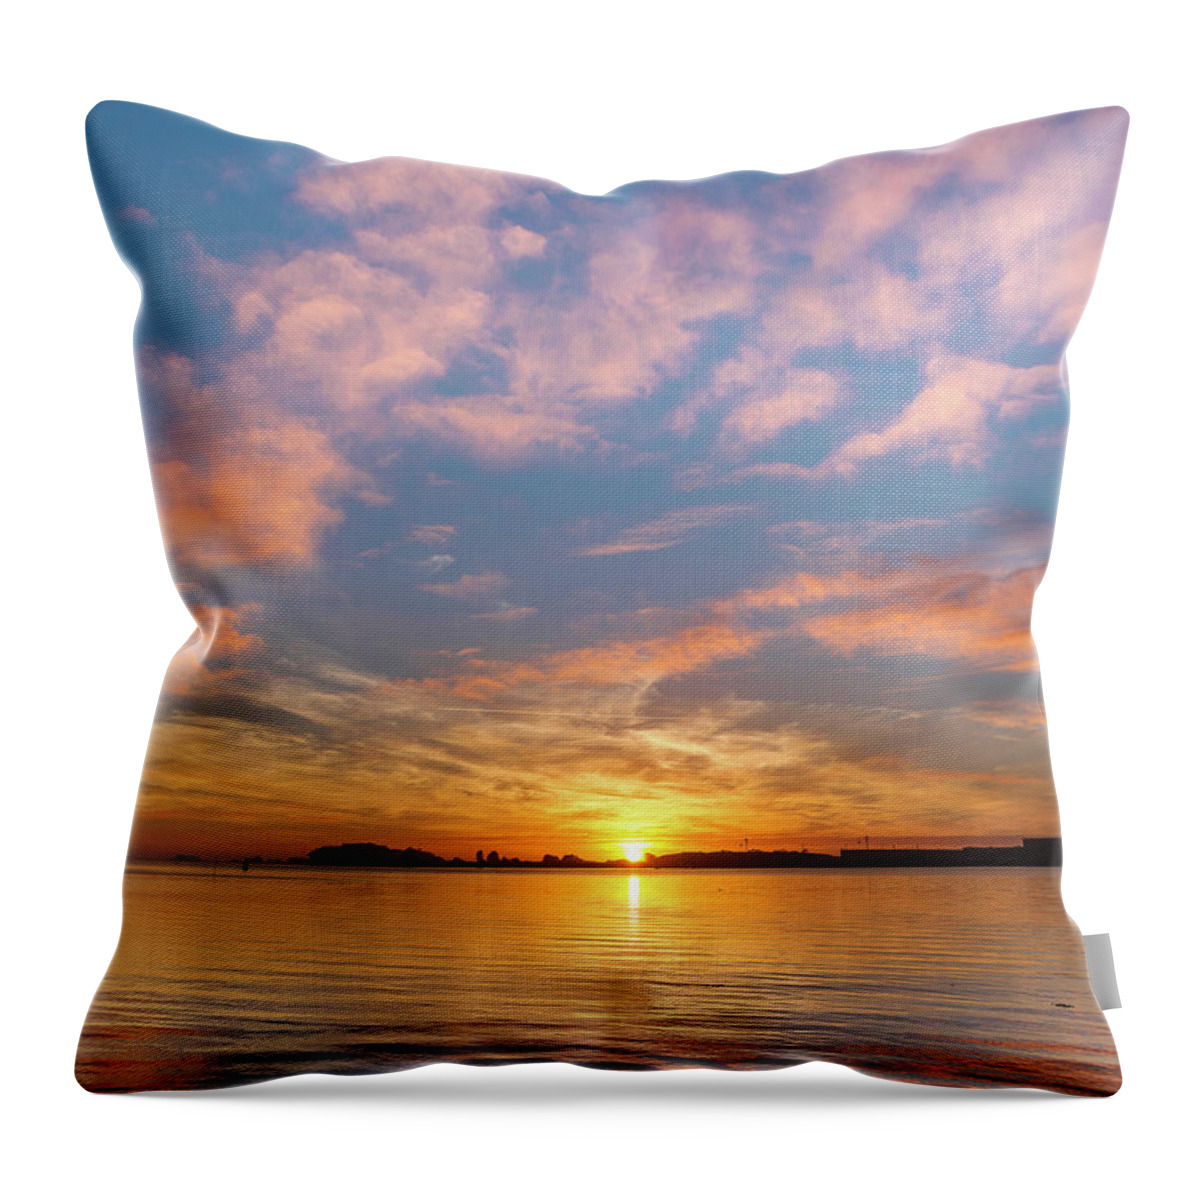 Humboldt Bay Throw Pillow featuring the photograph Fire Sunset on Humboldt Bay by Greg Nyquist